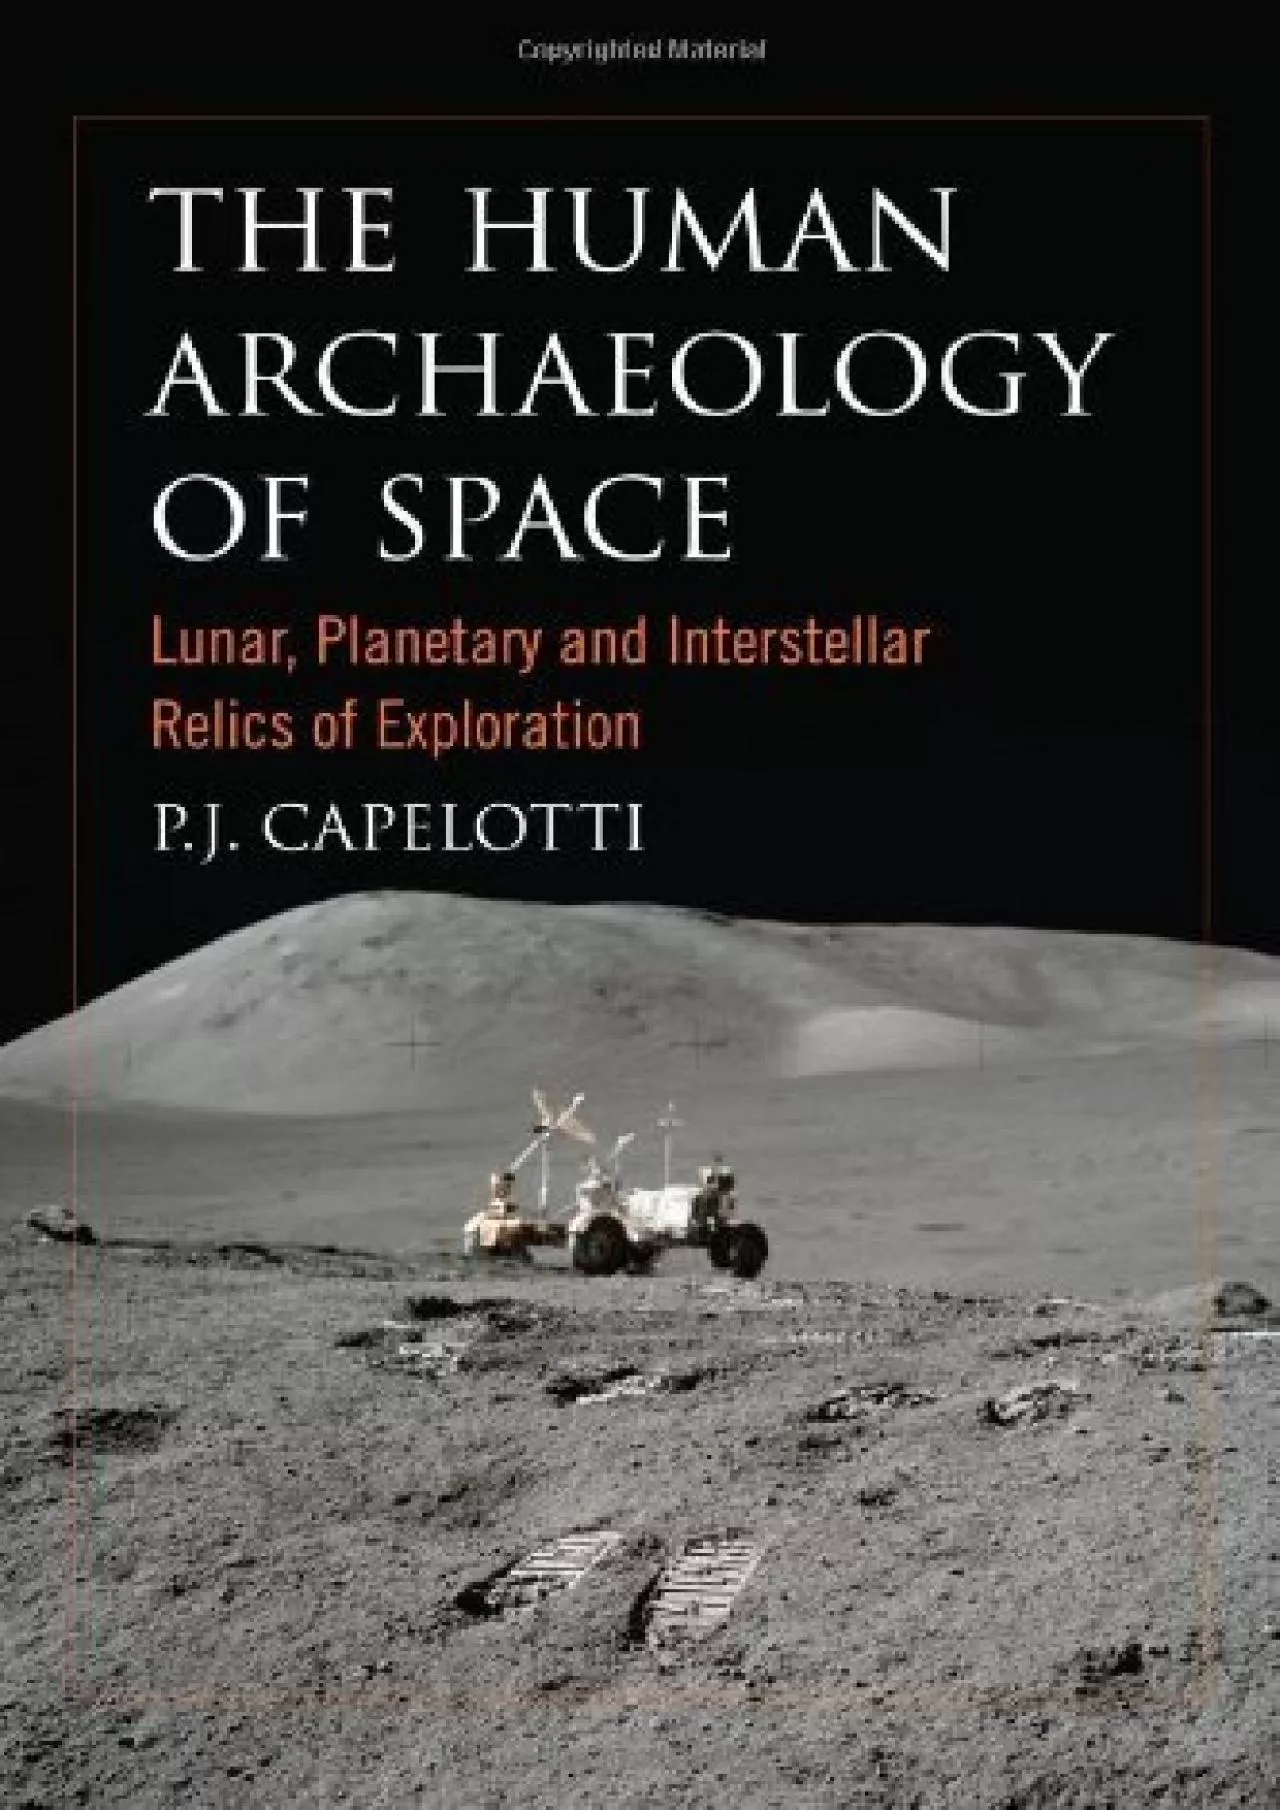 (BOOK)-The Human Archaeology of Space: Lunar, Planetary and Interstellar Relics of Exploration